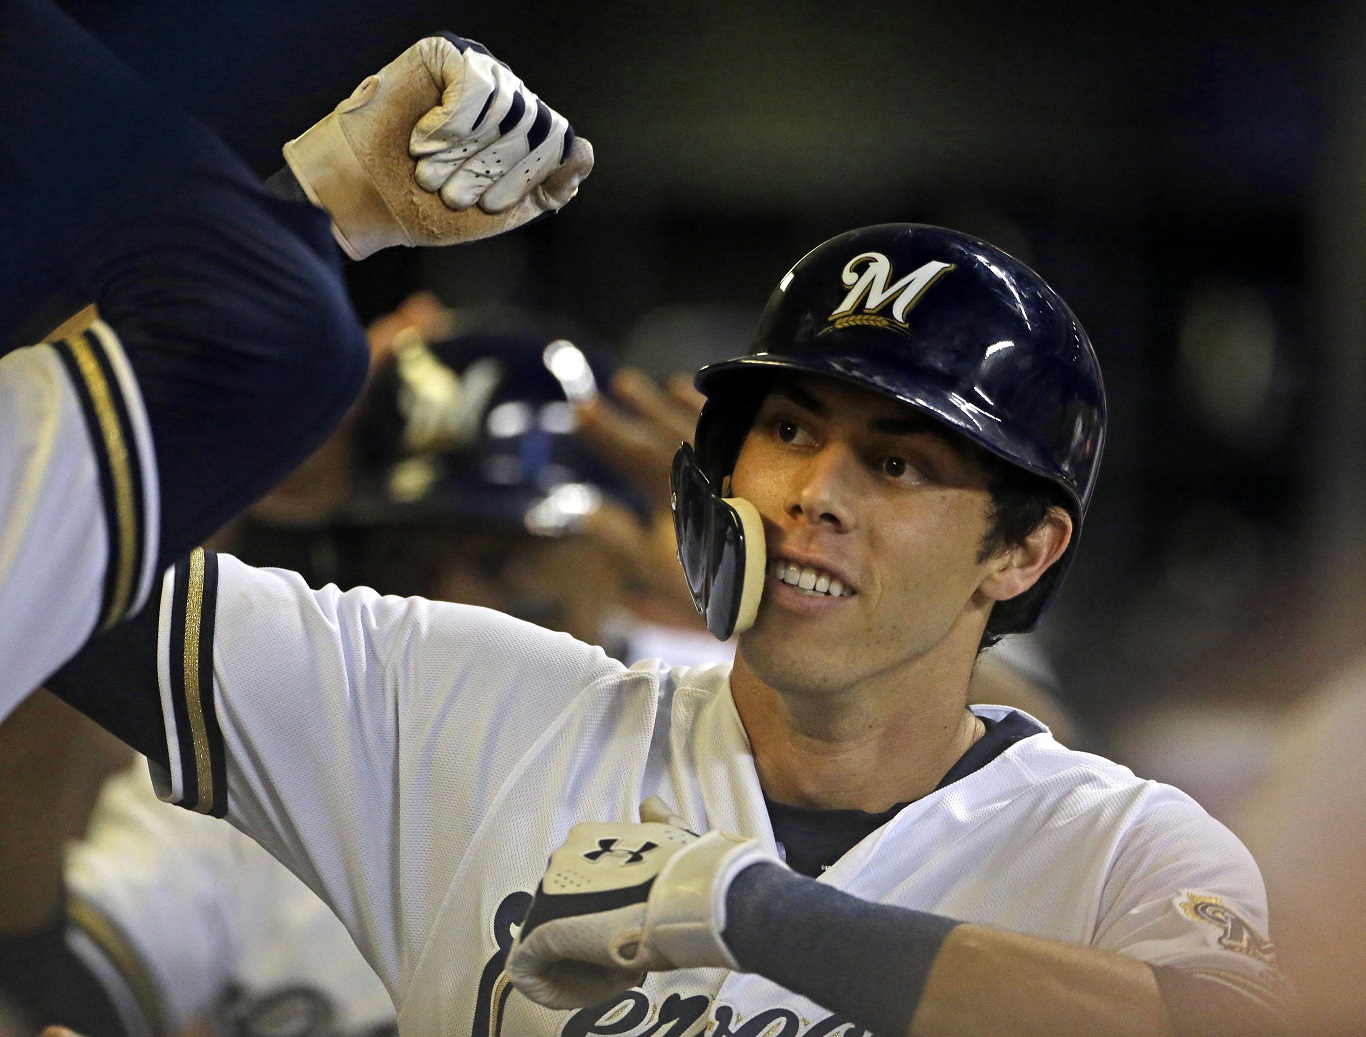 WATCH: After hitting for cycle, Yelich talks to kid who caught the HR